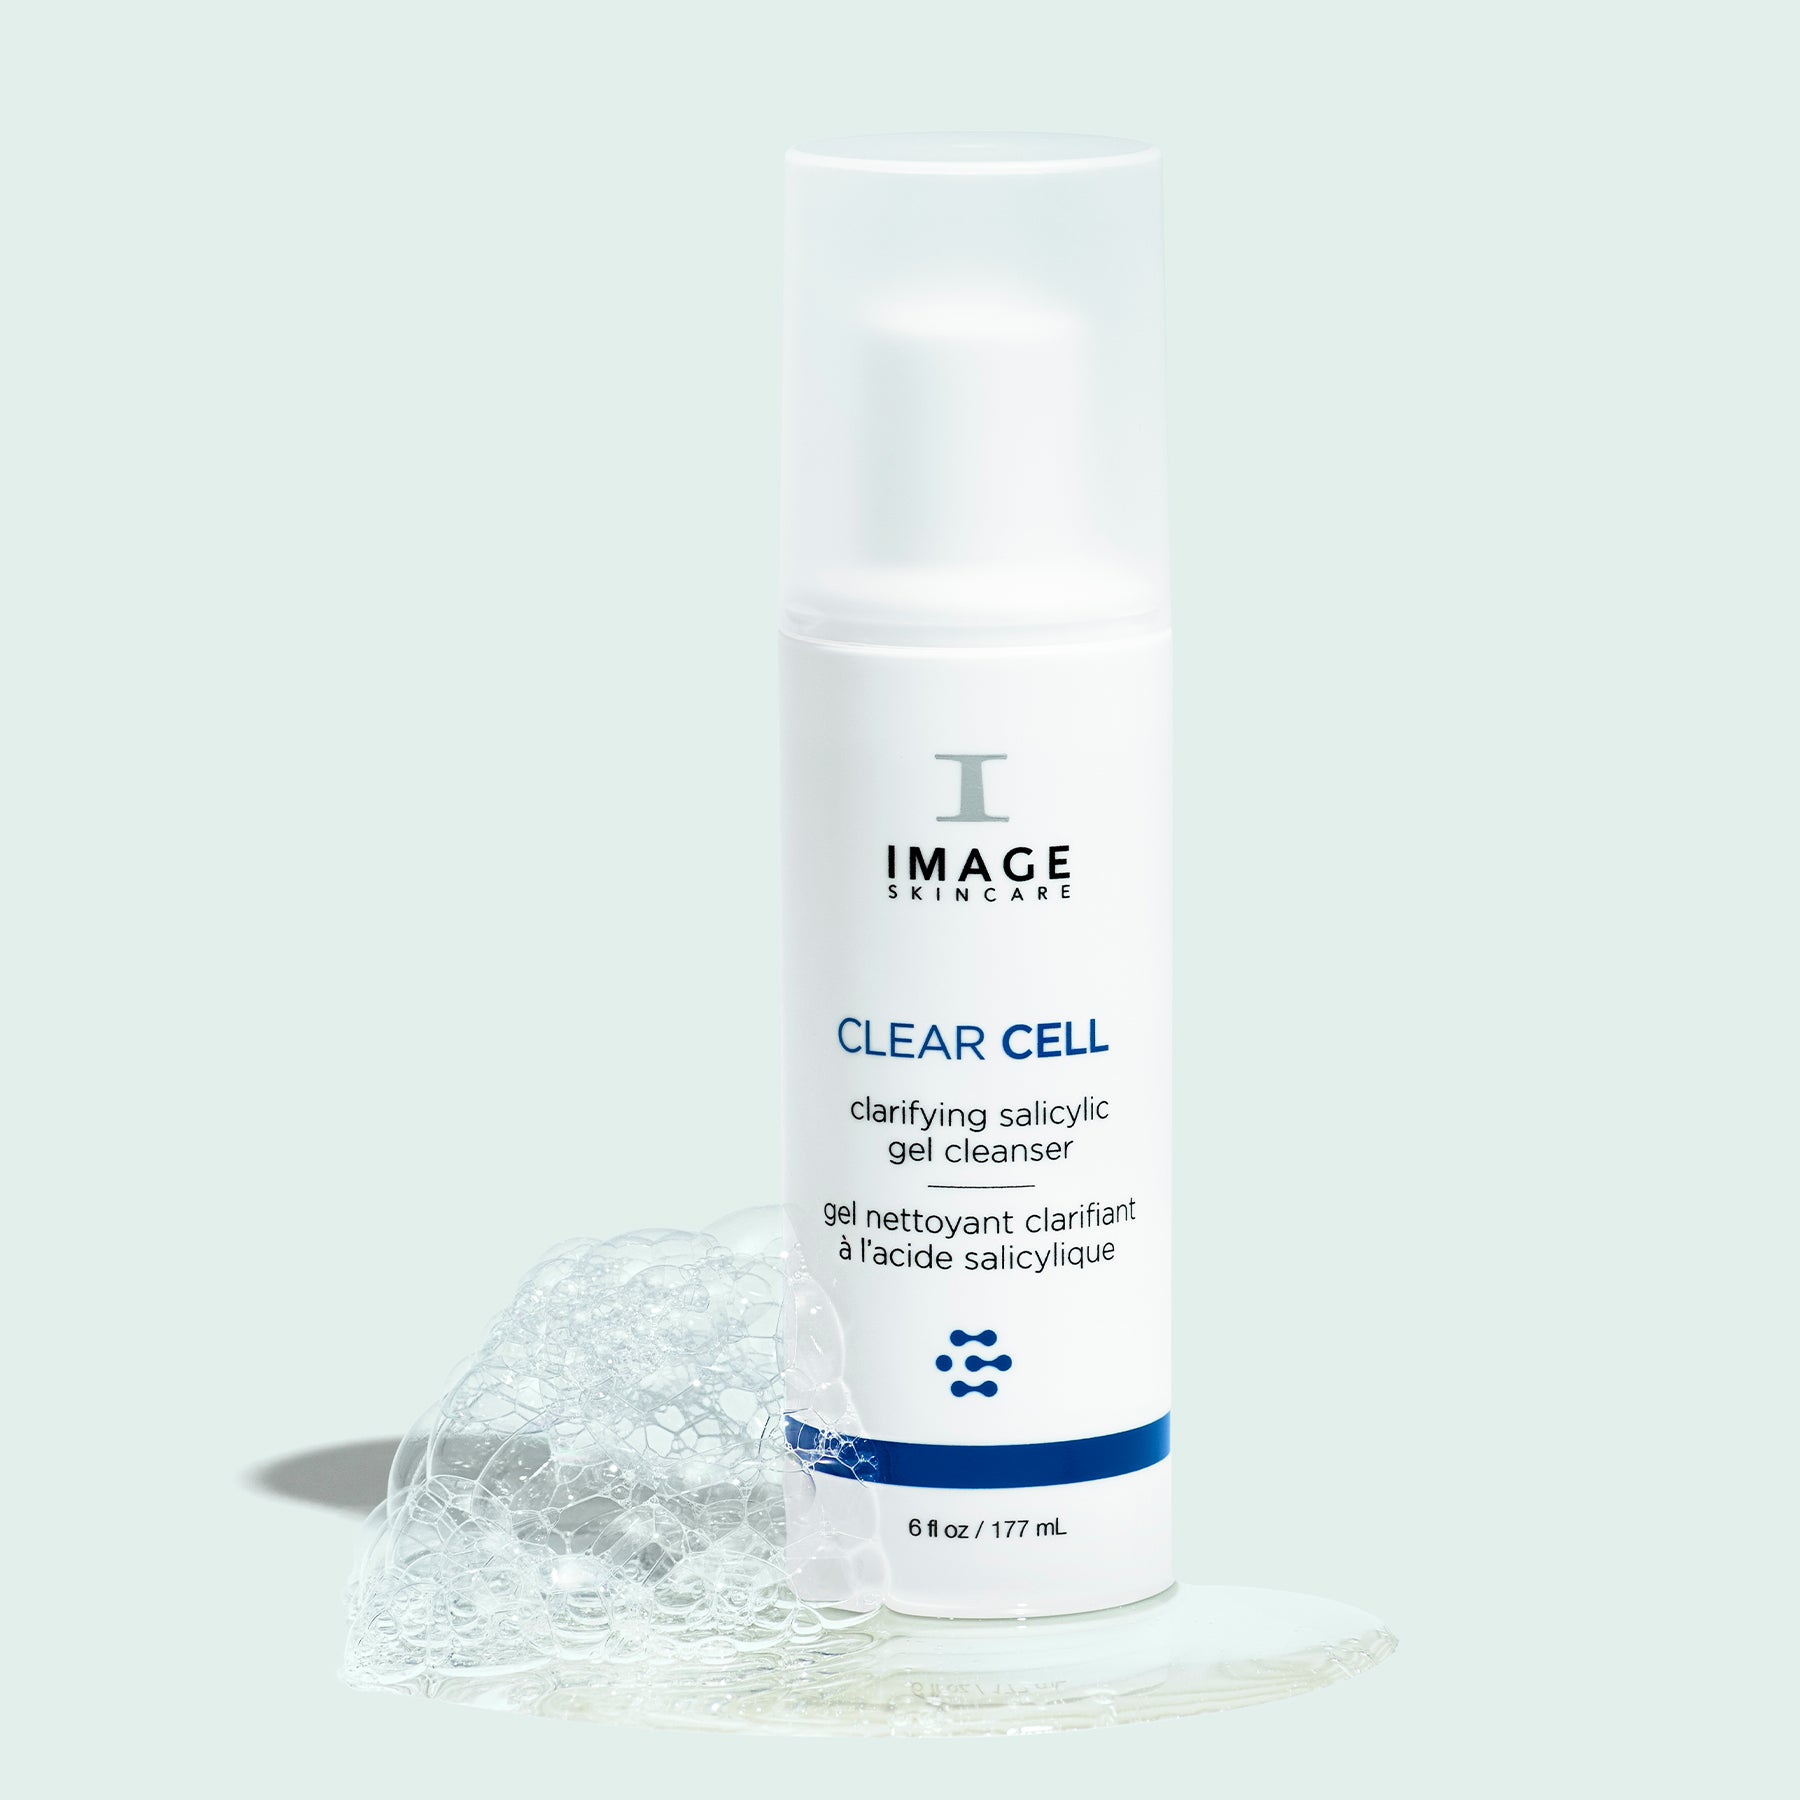 Exfoliating Gel Cleanser - Cosmetic Skin Solutions